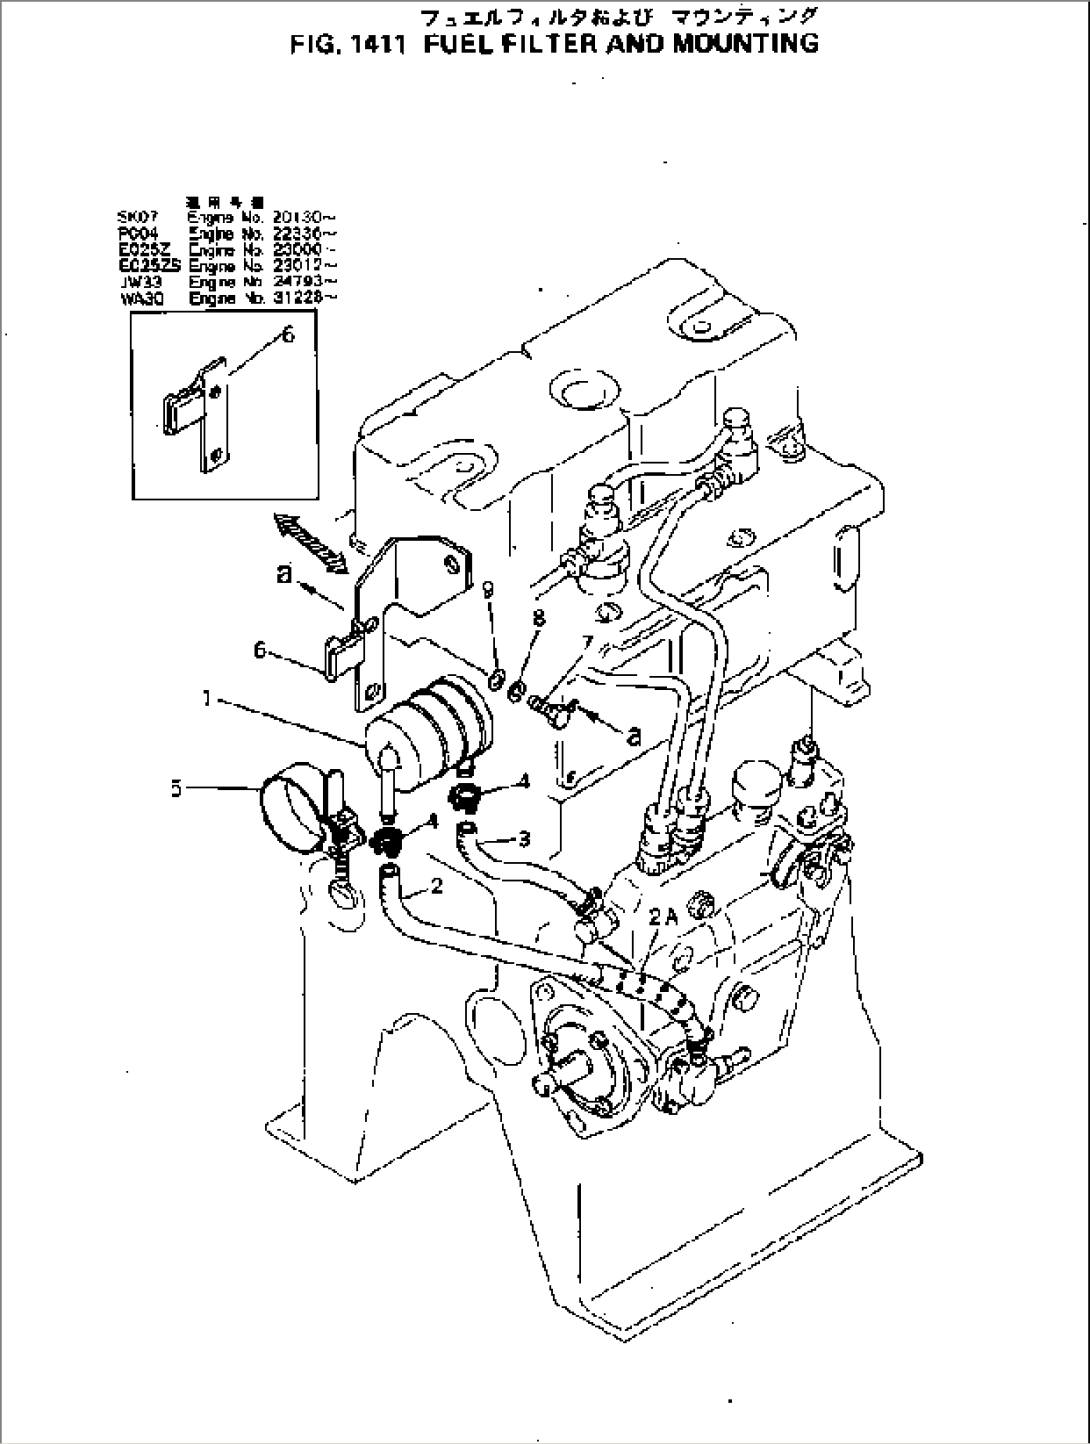 FUEL FILTER AND MOUNTING